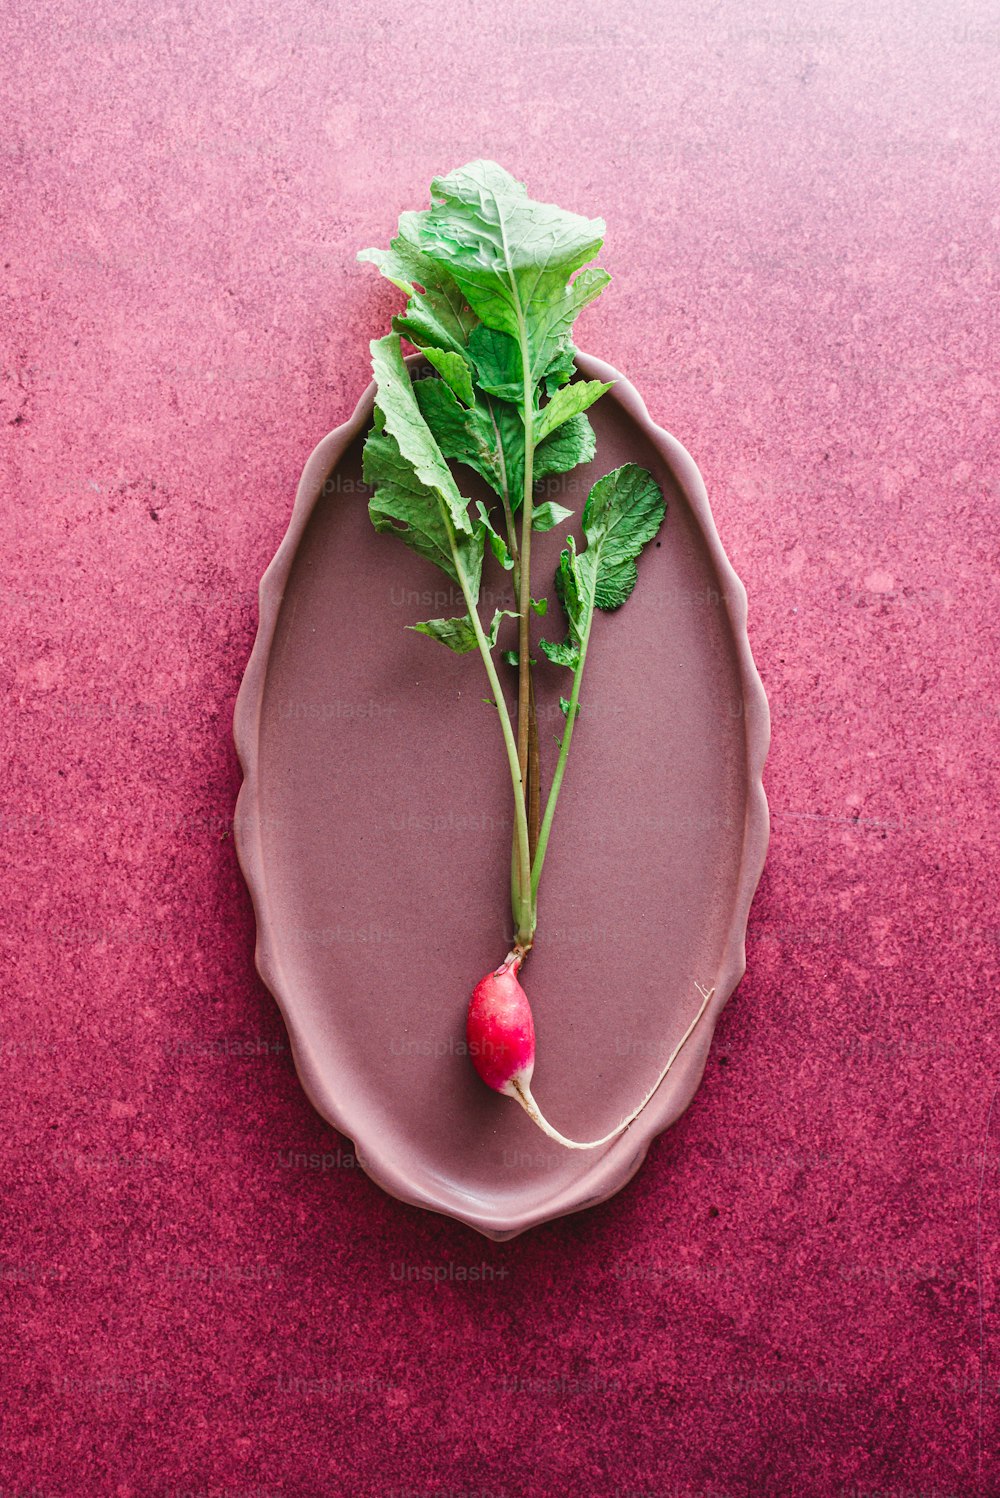 a radish on a plate on a pink surface